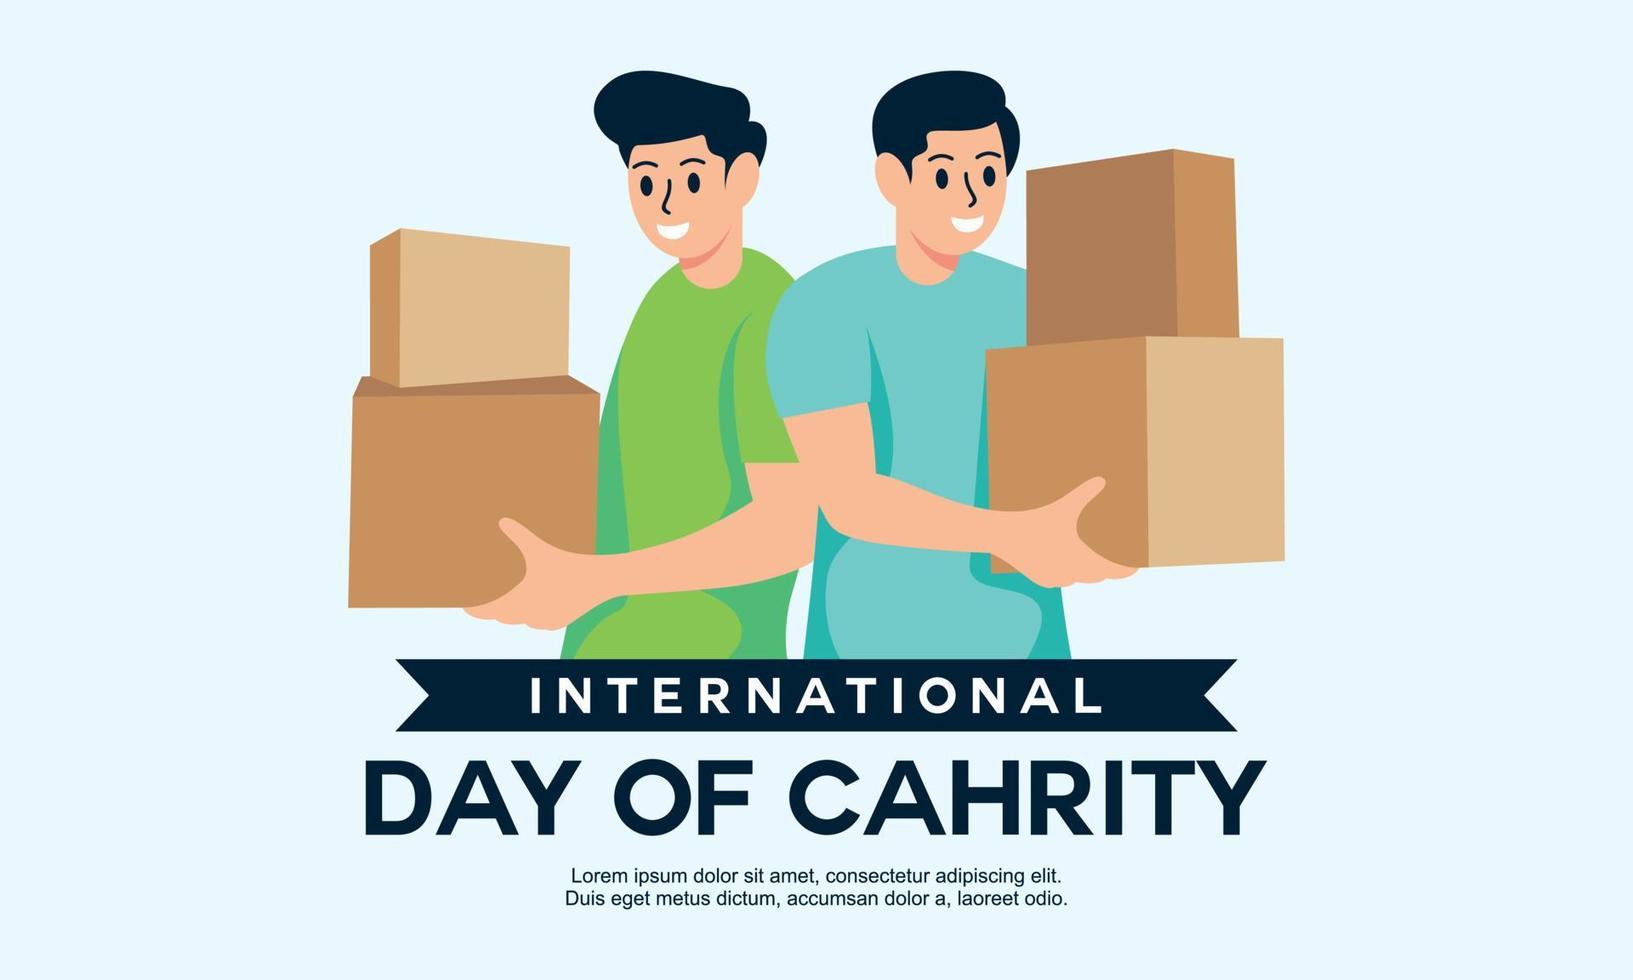 Donation in the international day of charity illustration vector